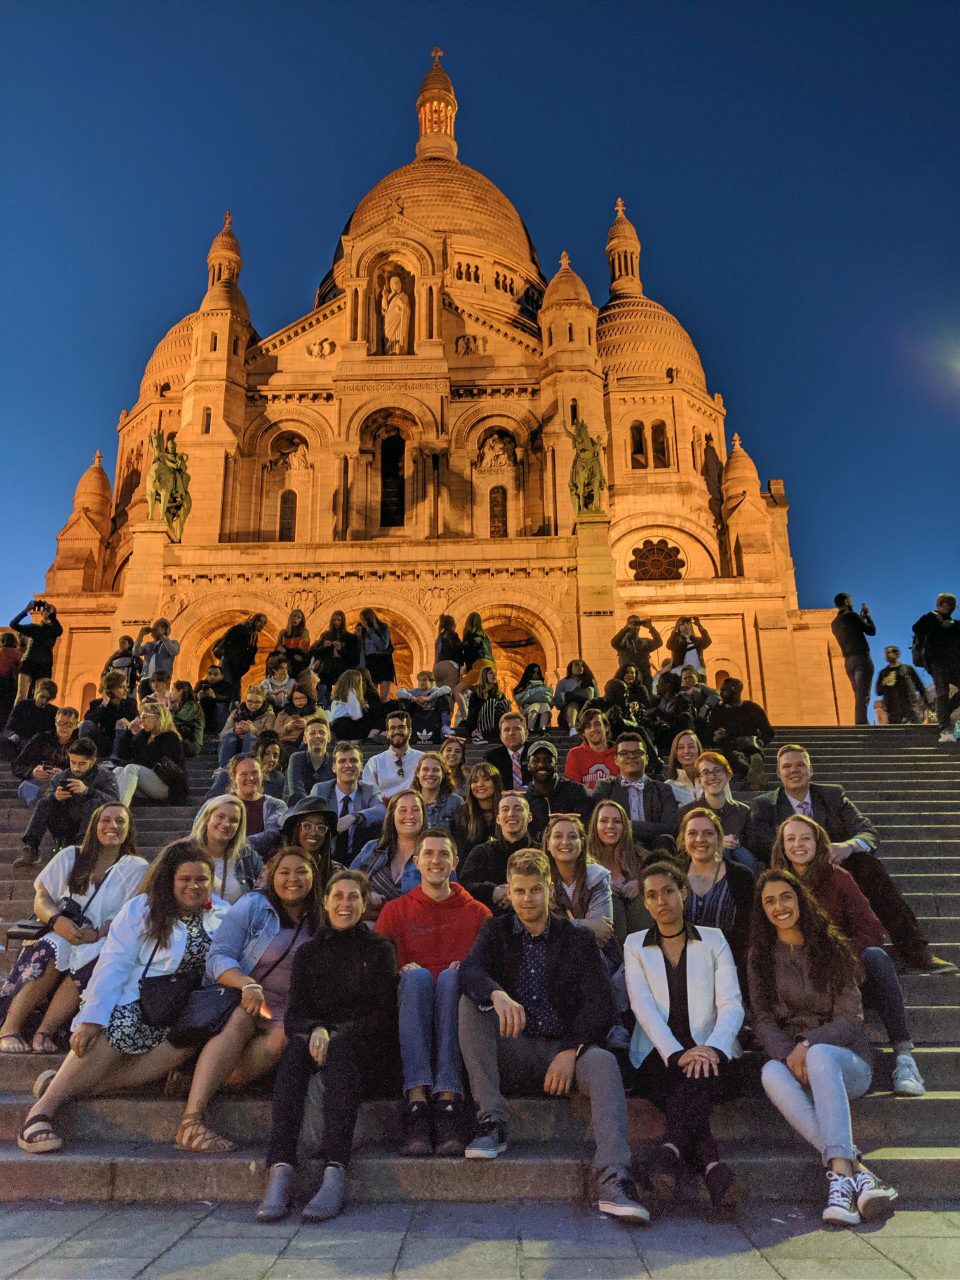 Students in front of Sacre Coeur in Paris